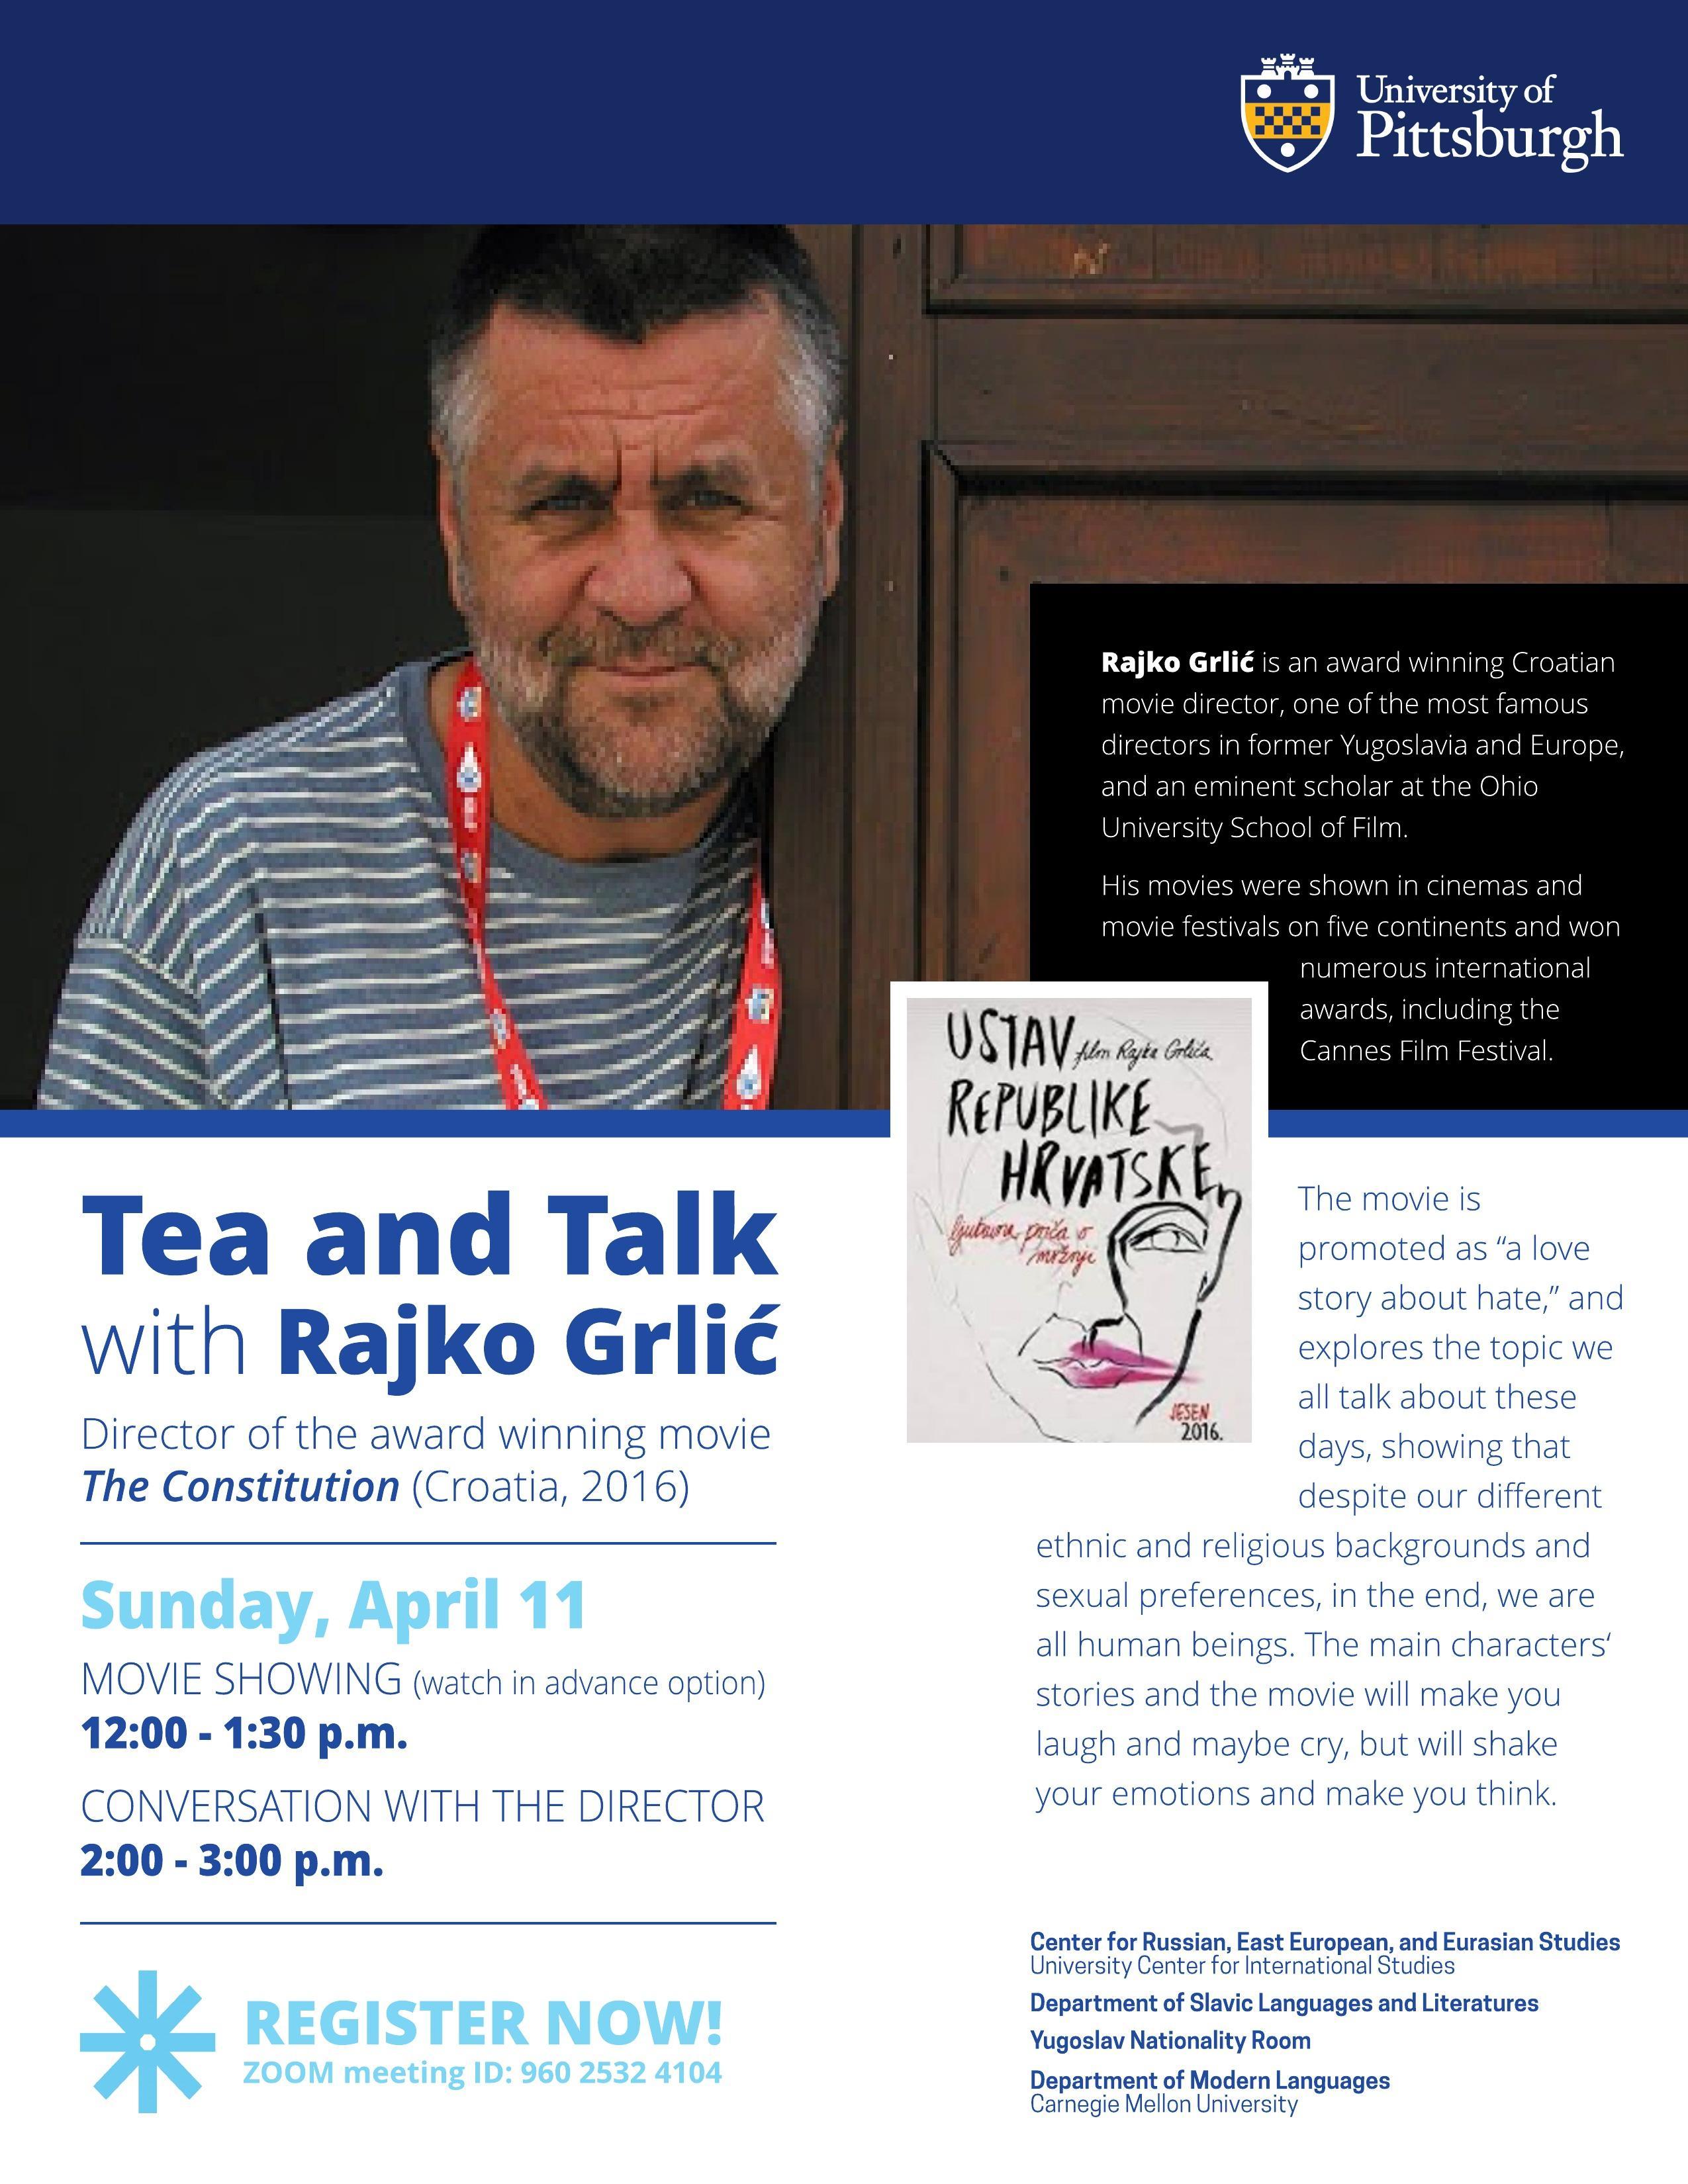 Picture of Rajko Grlic and the movie poster of his film; on a navy and white background; accessible flyer linked to this flyer